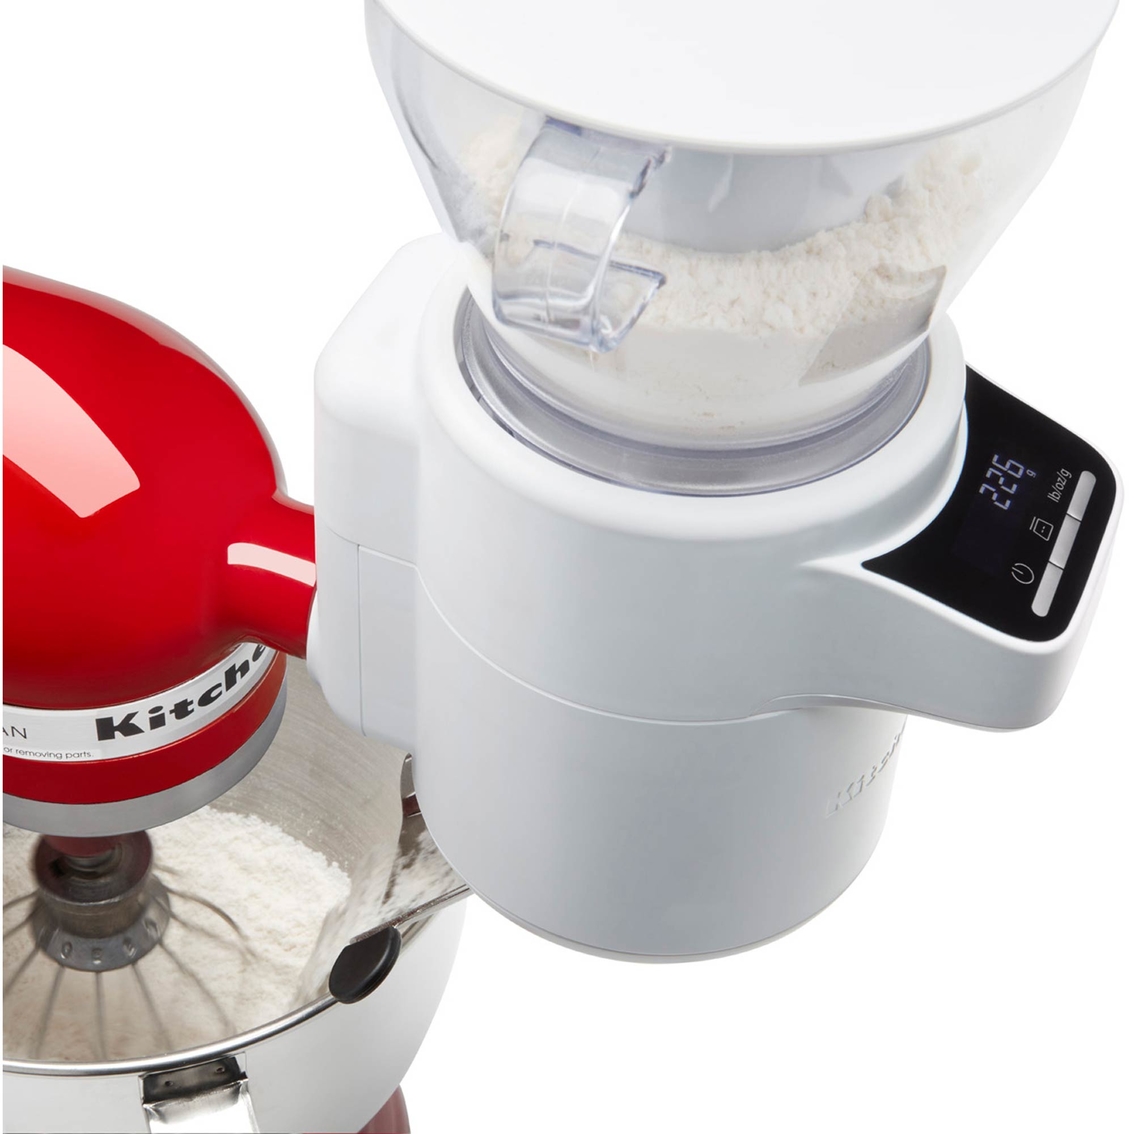 KitchenAid - KSMSFTA - Sifter + Scale Stand Mixer Attachment 4 Cup, White  New